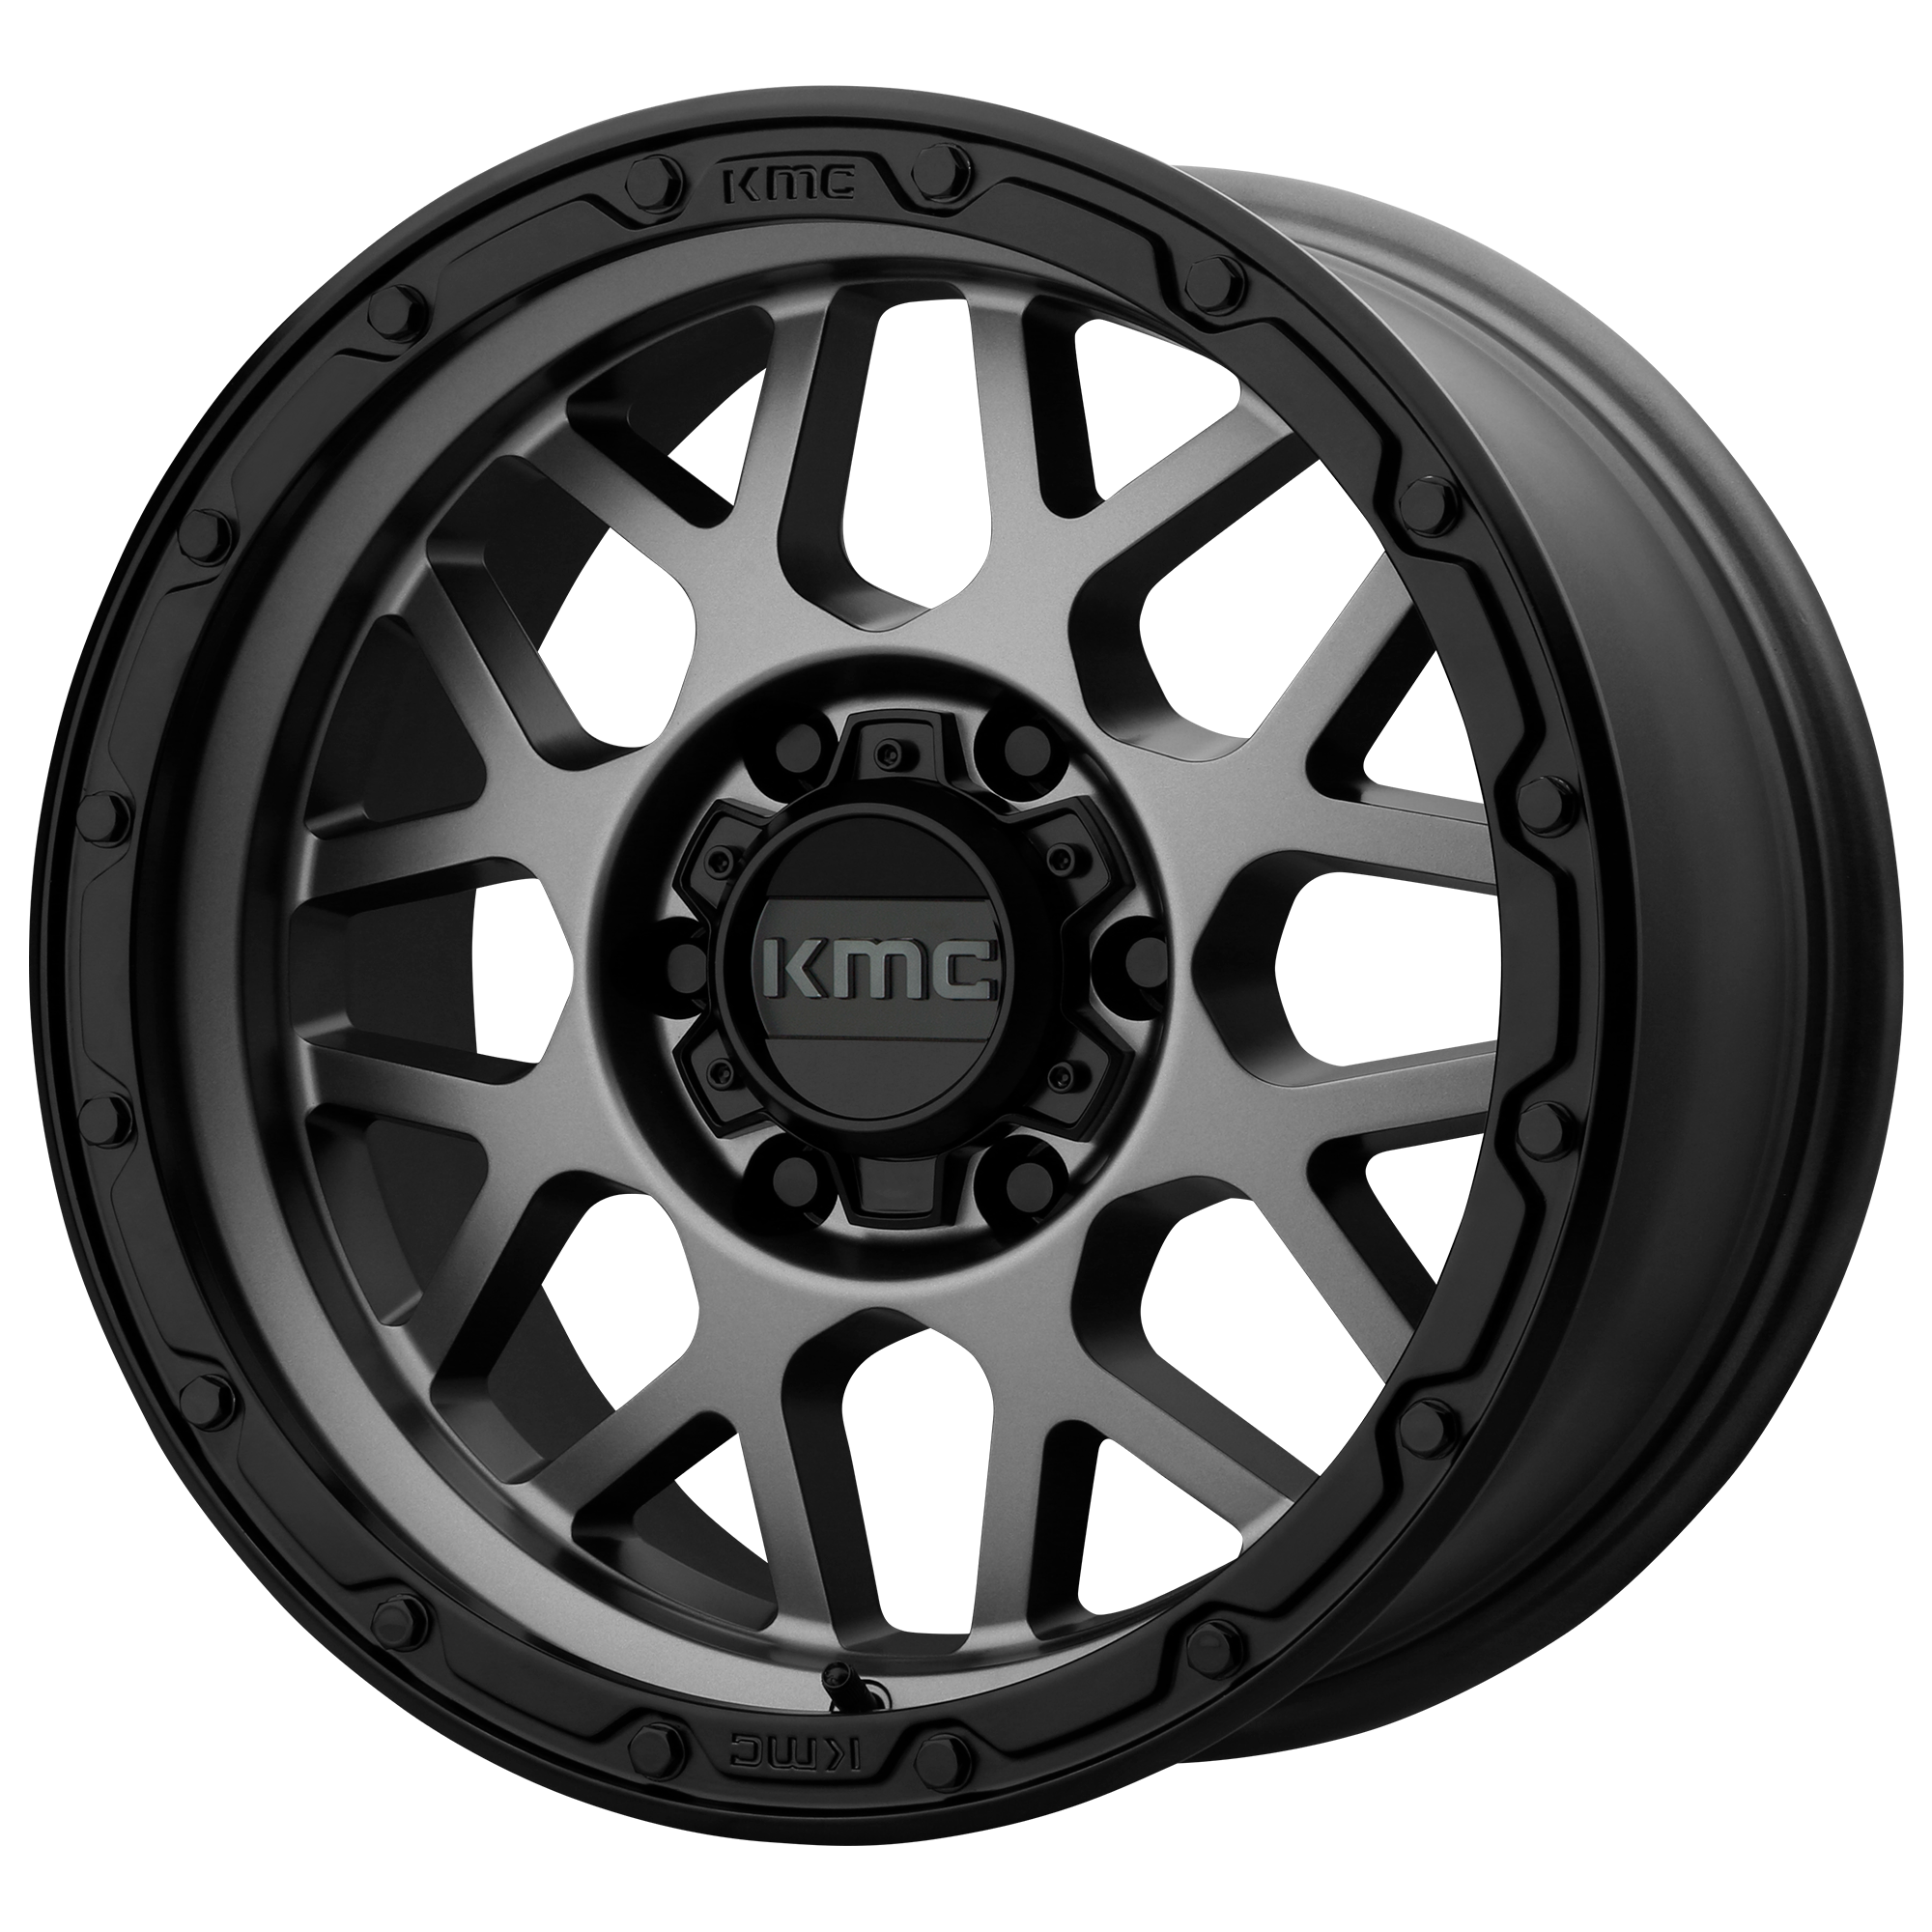 GRENADE OFF-ROAD 17x8.5 6x135.00 MATTE GRAY W/ MATTE BLACK LIP (0 mm) - Tires and Engine Performance